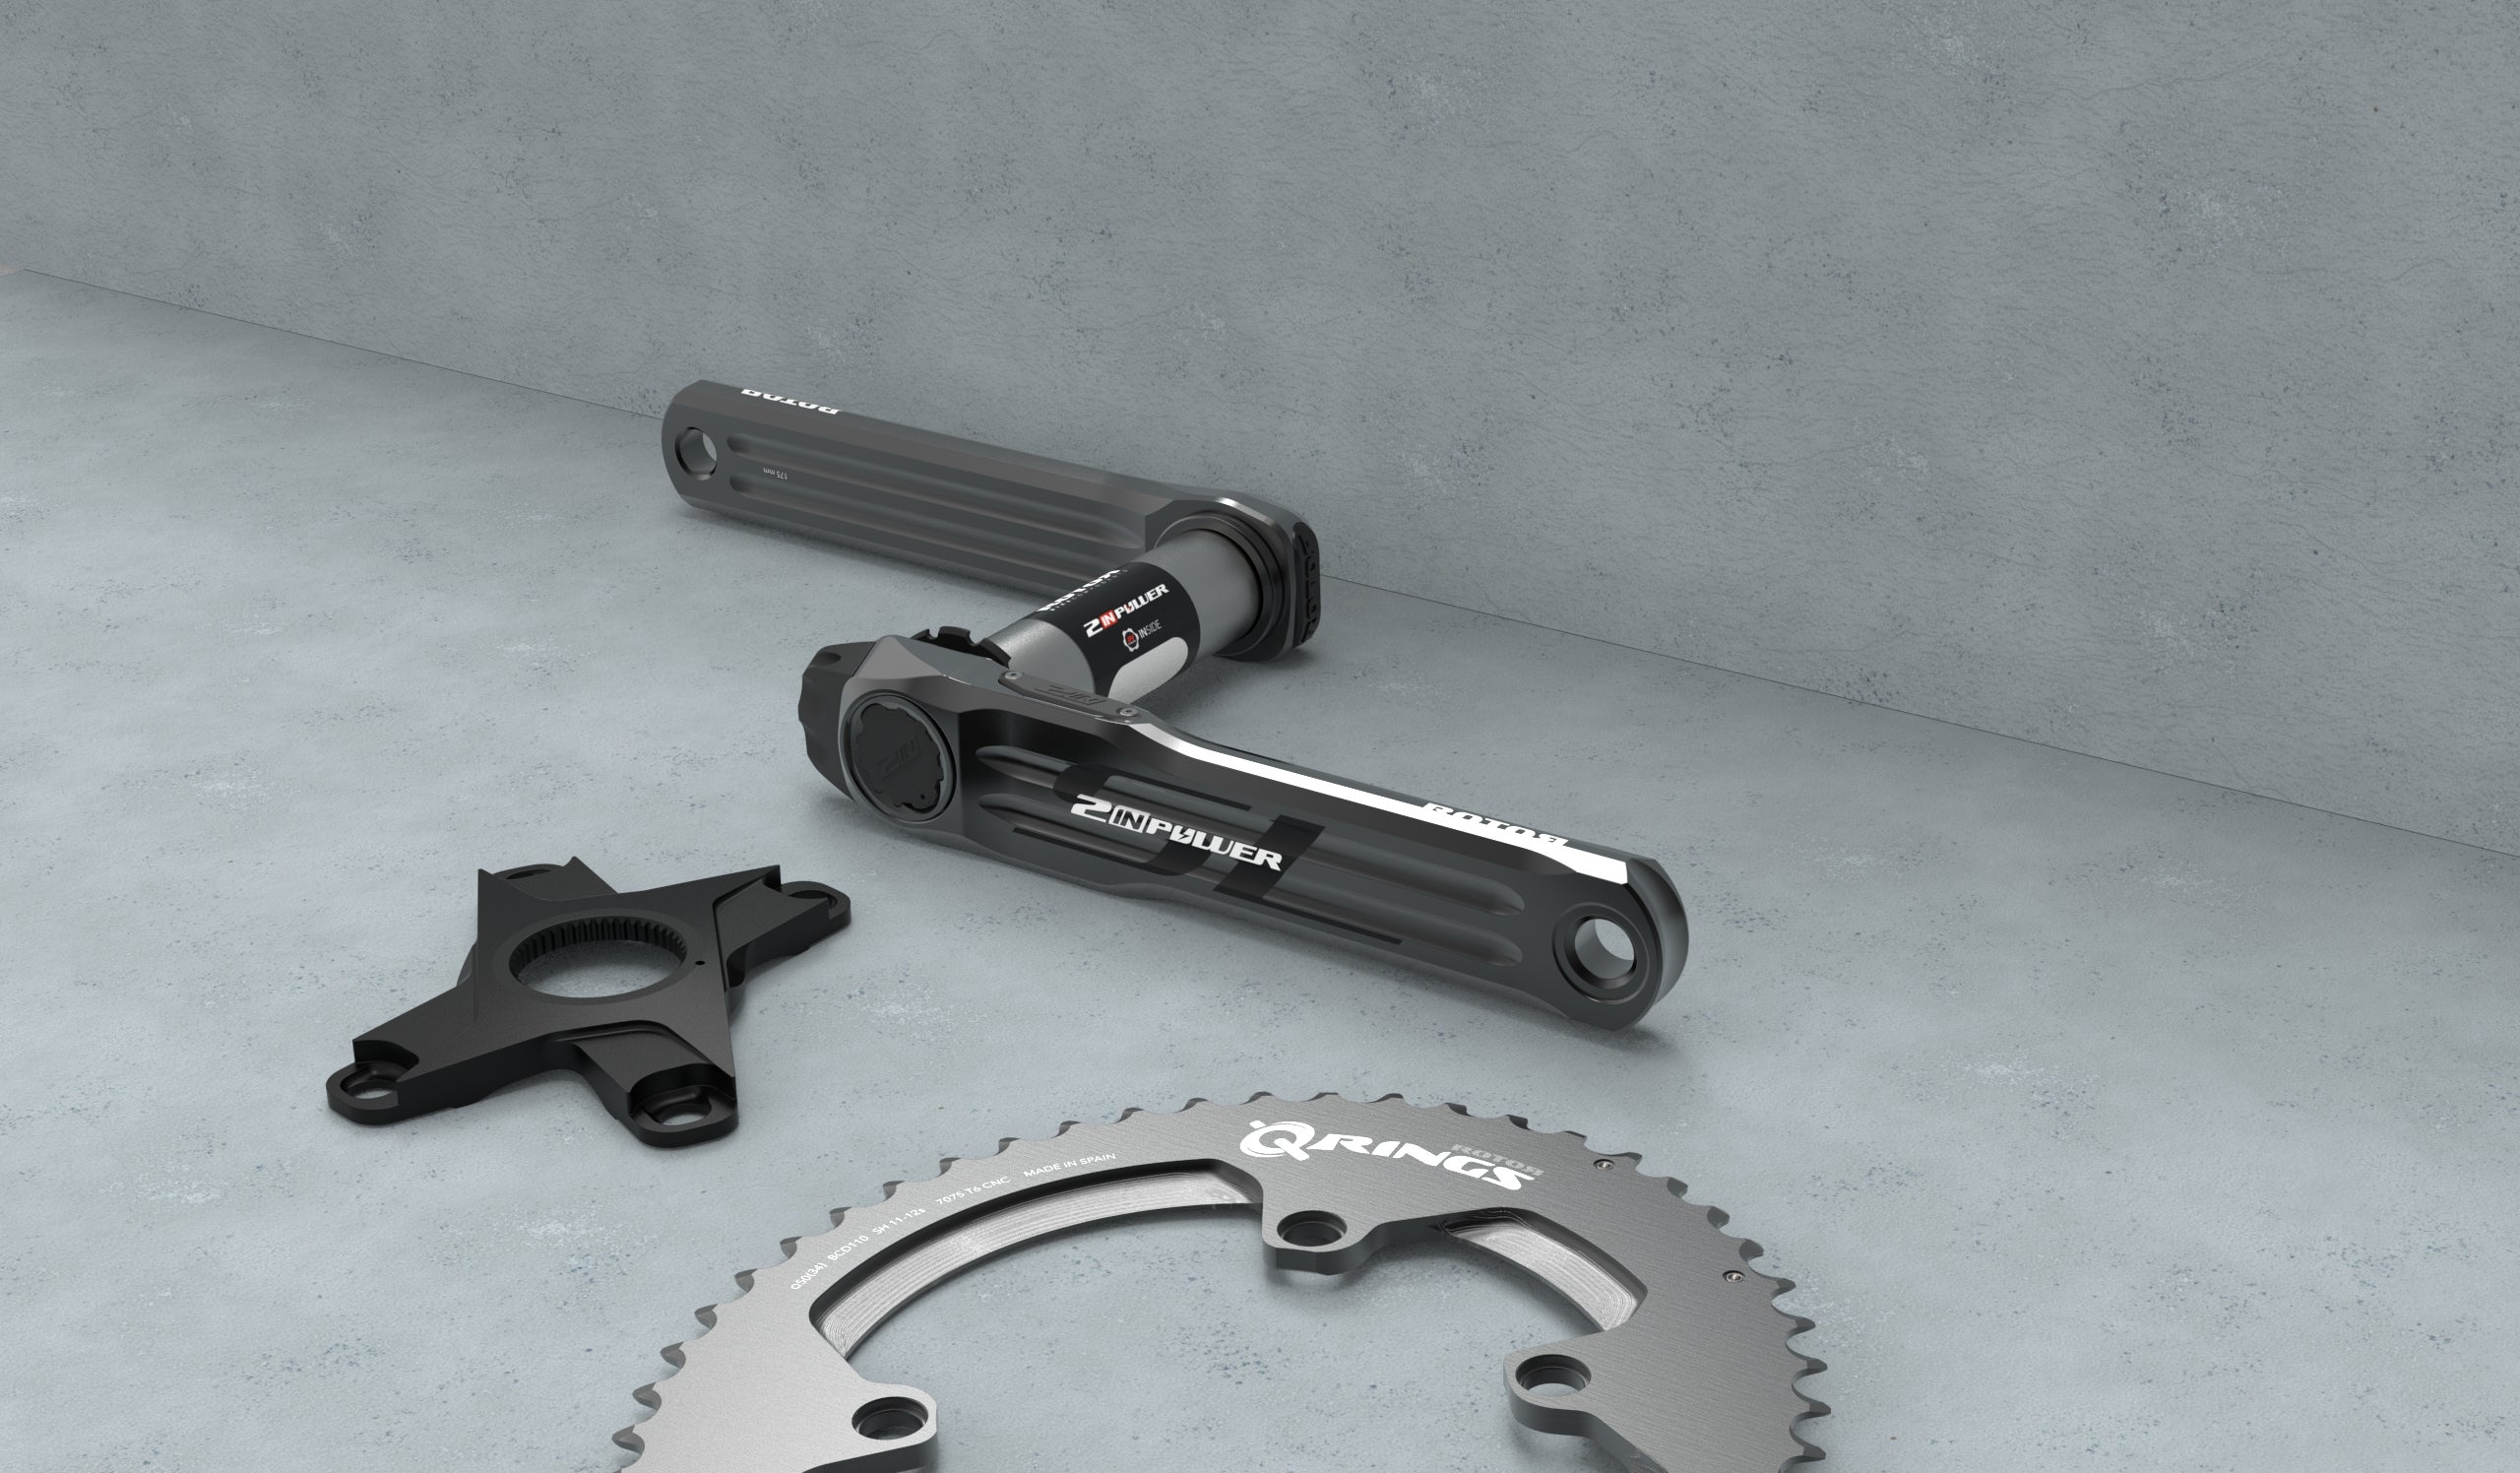 New Rotor 2INpower SL power meter crankset is said to be their